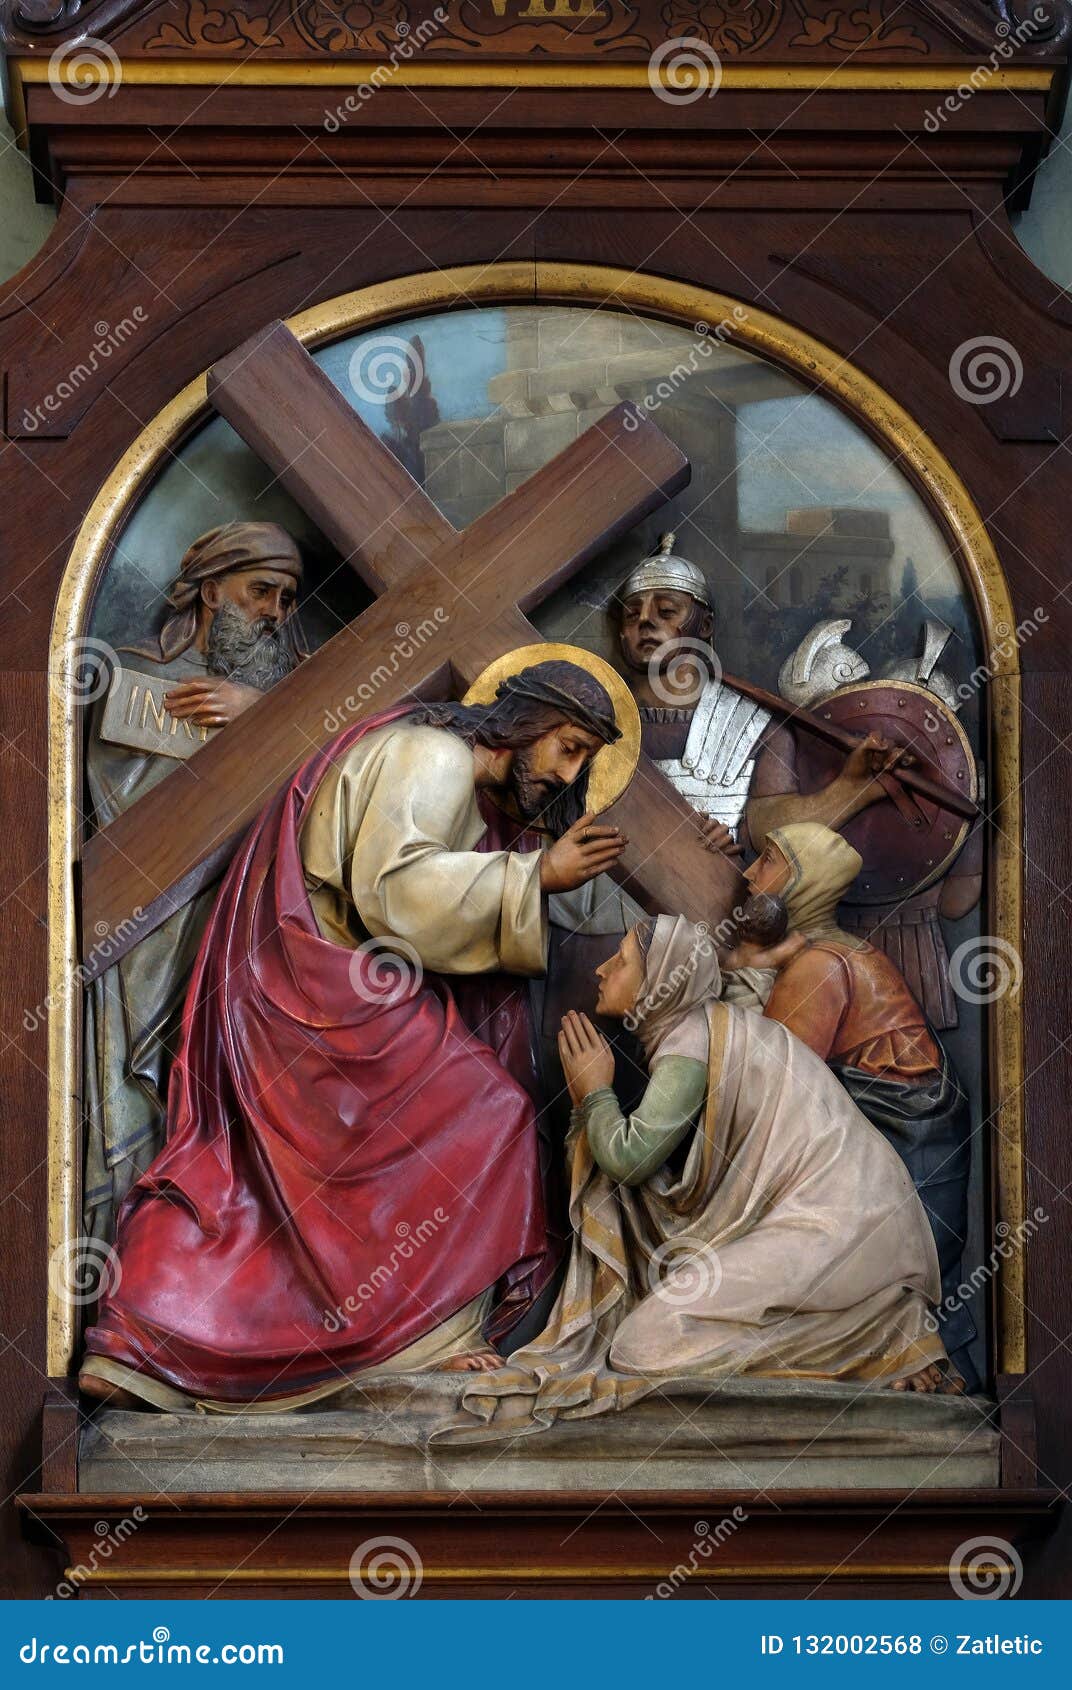 8th stations of the cross,jesus meets the daughters of jerusalem